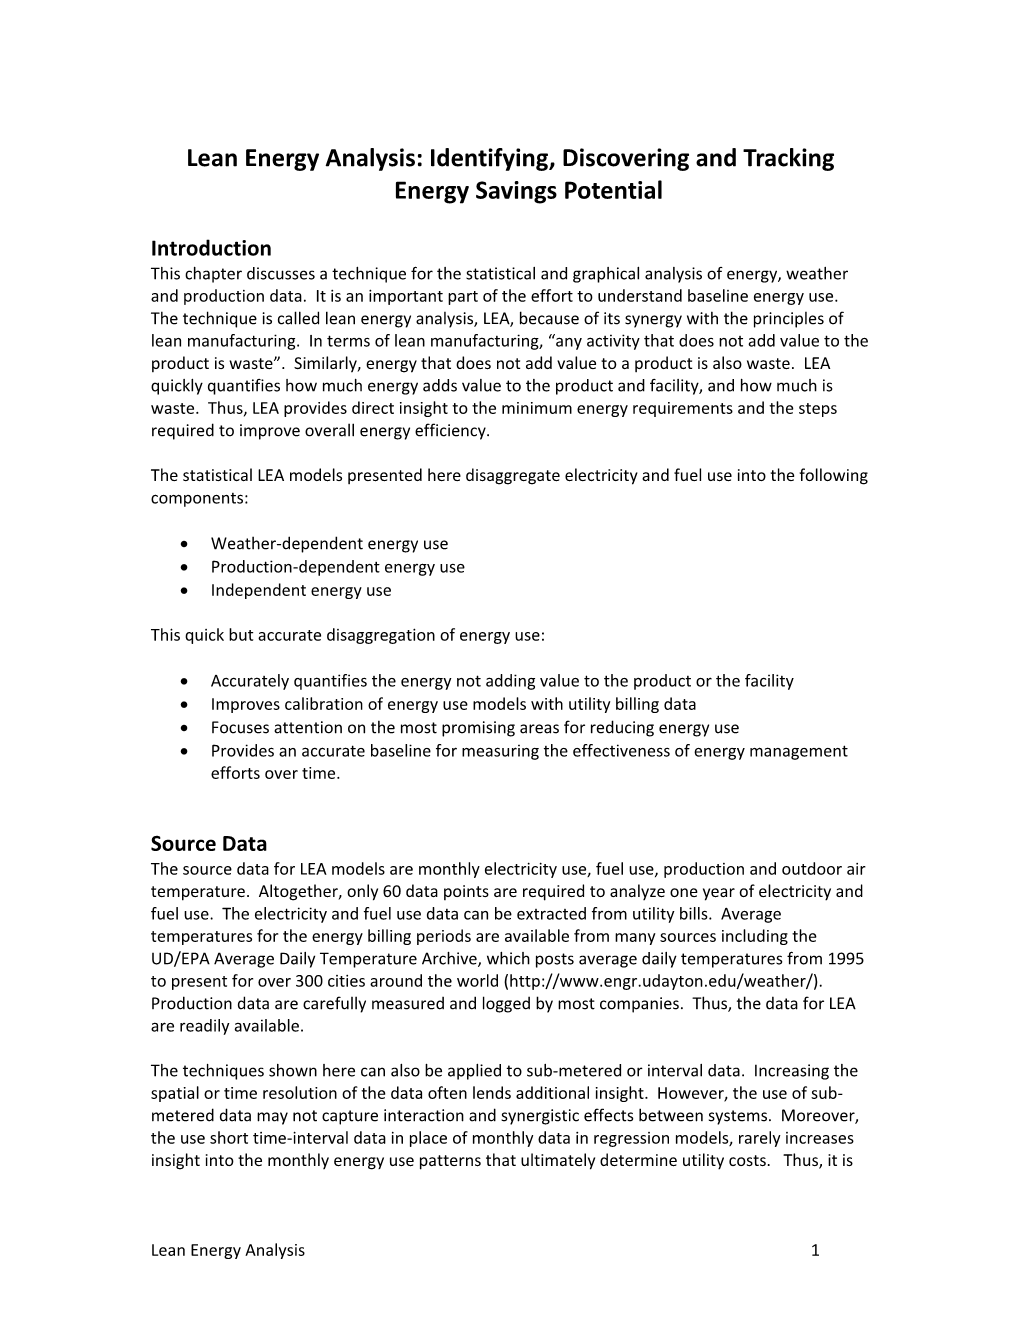 Lean Energy Analysis: Identifying, Discovering and Tracking Energy Savings Potential